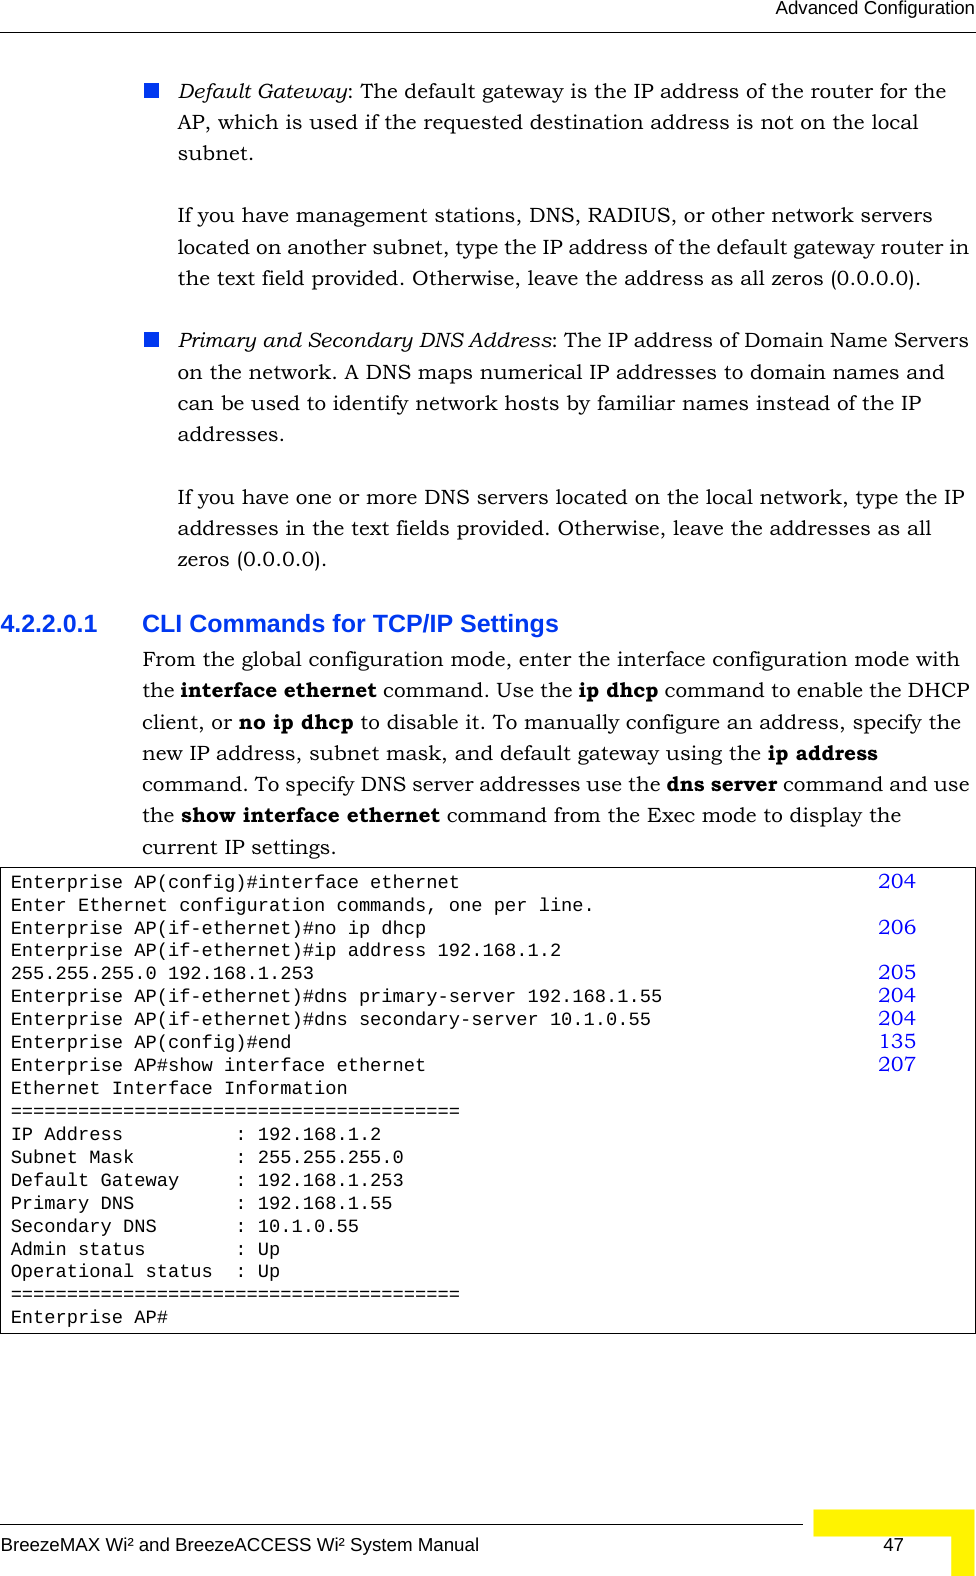 Advanced ConfigurationBreezeMAX Wi² and BreezeACCESS Wi² System Manual  47Default Gateway: The default gateway is the IP address of the router for the AP, which is used if the requested destination address is not on the local subnet.If you have management stations, DNS, RADIUS, or other network servers located on another subnet, type the IP address of the default gateway router in the text field provided. Otherwise, leave the address as all zeros (0.0.0.0).Primary and Secondary DNS Address: The IP address of Domain Name Servers on the network. A DNS maps numerical IP addresses to domain names and can be used to identify network hosts by familiar names instead of the IP addresses. If you have one or more DNS servers located on the local network, type the IP addresses in the text fields provided. Otherwise, leave the addresses as all zeros (0.0.0.0).4.2.2.0.1 CLI Commands for TCP/IP Settings From the global configuration mode, enter the interface configuration mode with the interface ethernet command. Use the ip dhcp command to enable the DHCP client, or no ip dhcp to disable it. To manually configure an address, specify the new IP address, subnet mask, and default gateway using the ip address command. To specify DNS server addresses use the dns server command and use the show interface ethernet command from the Exec mode to display the current IP settings.Enterprise AP(config)#interface ethernet 204Enter Ethernet configuration commands, one per line.Enterprise AP(if-ethernet)#no ip dhcp 206Enterprise AP(if-ethernet)#ip address 192.168.1.2 255.255.255.0 192.168.1.253 205Enterprise AP(if-ethernet)#dns primary-server 192.168.1.55 204Enterprise AP(if-ethernet)#dns secondary-server 10.1.0.55 204Enterprise AP(config)#end 135Enterprise AP#show interface ethernet 207Ethernet Interface Information========================================IP Address          : 192.168.1.2Subnet Mask         : 255.255.255.0Default Gateway     : 192.168.1.253Primary DNS         : 192.168.1.55Secondary DNS       : 10.1.0.55Admin status        : UpOperational status  : Up========================================Enterprise AP#